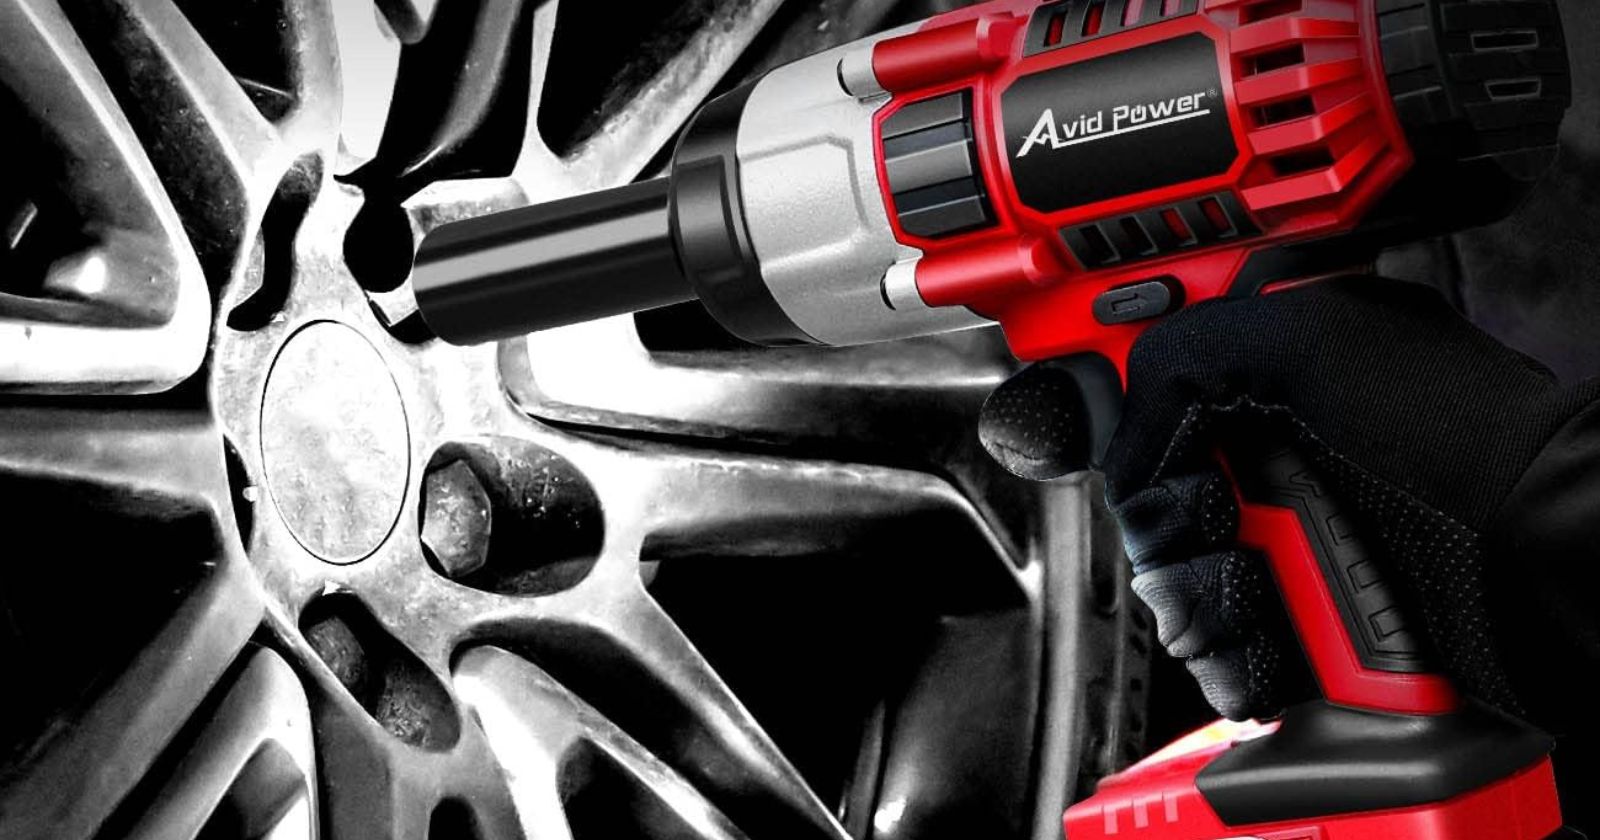 AVID POWER Cordless Impact Wrench Review